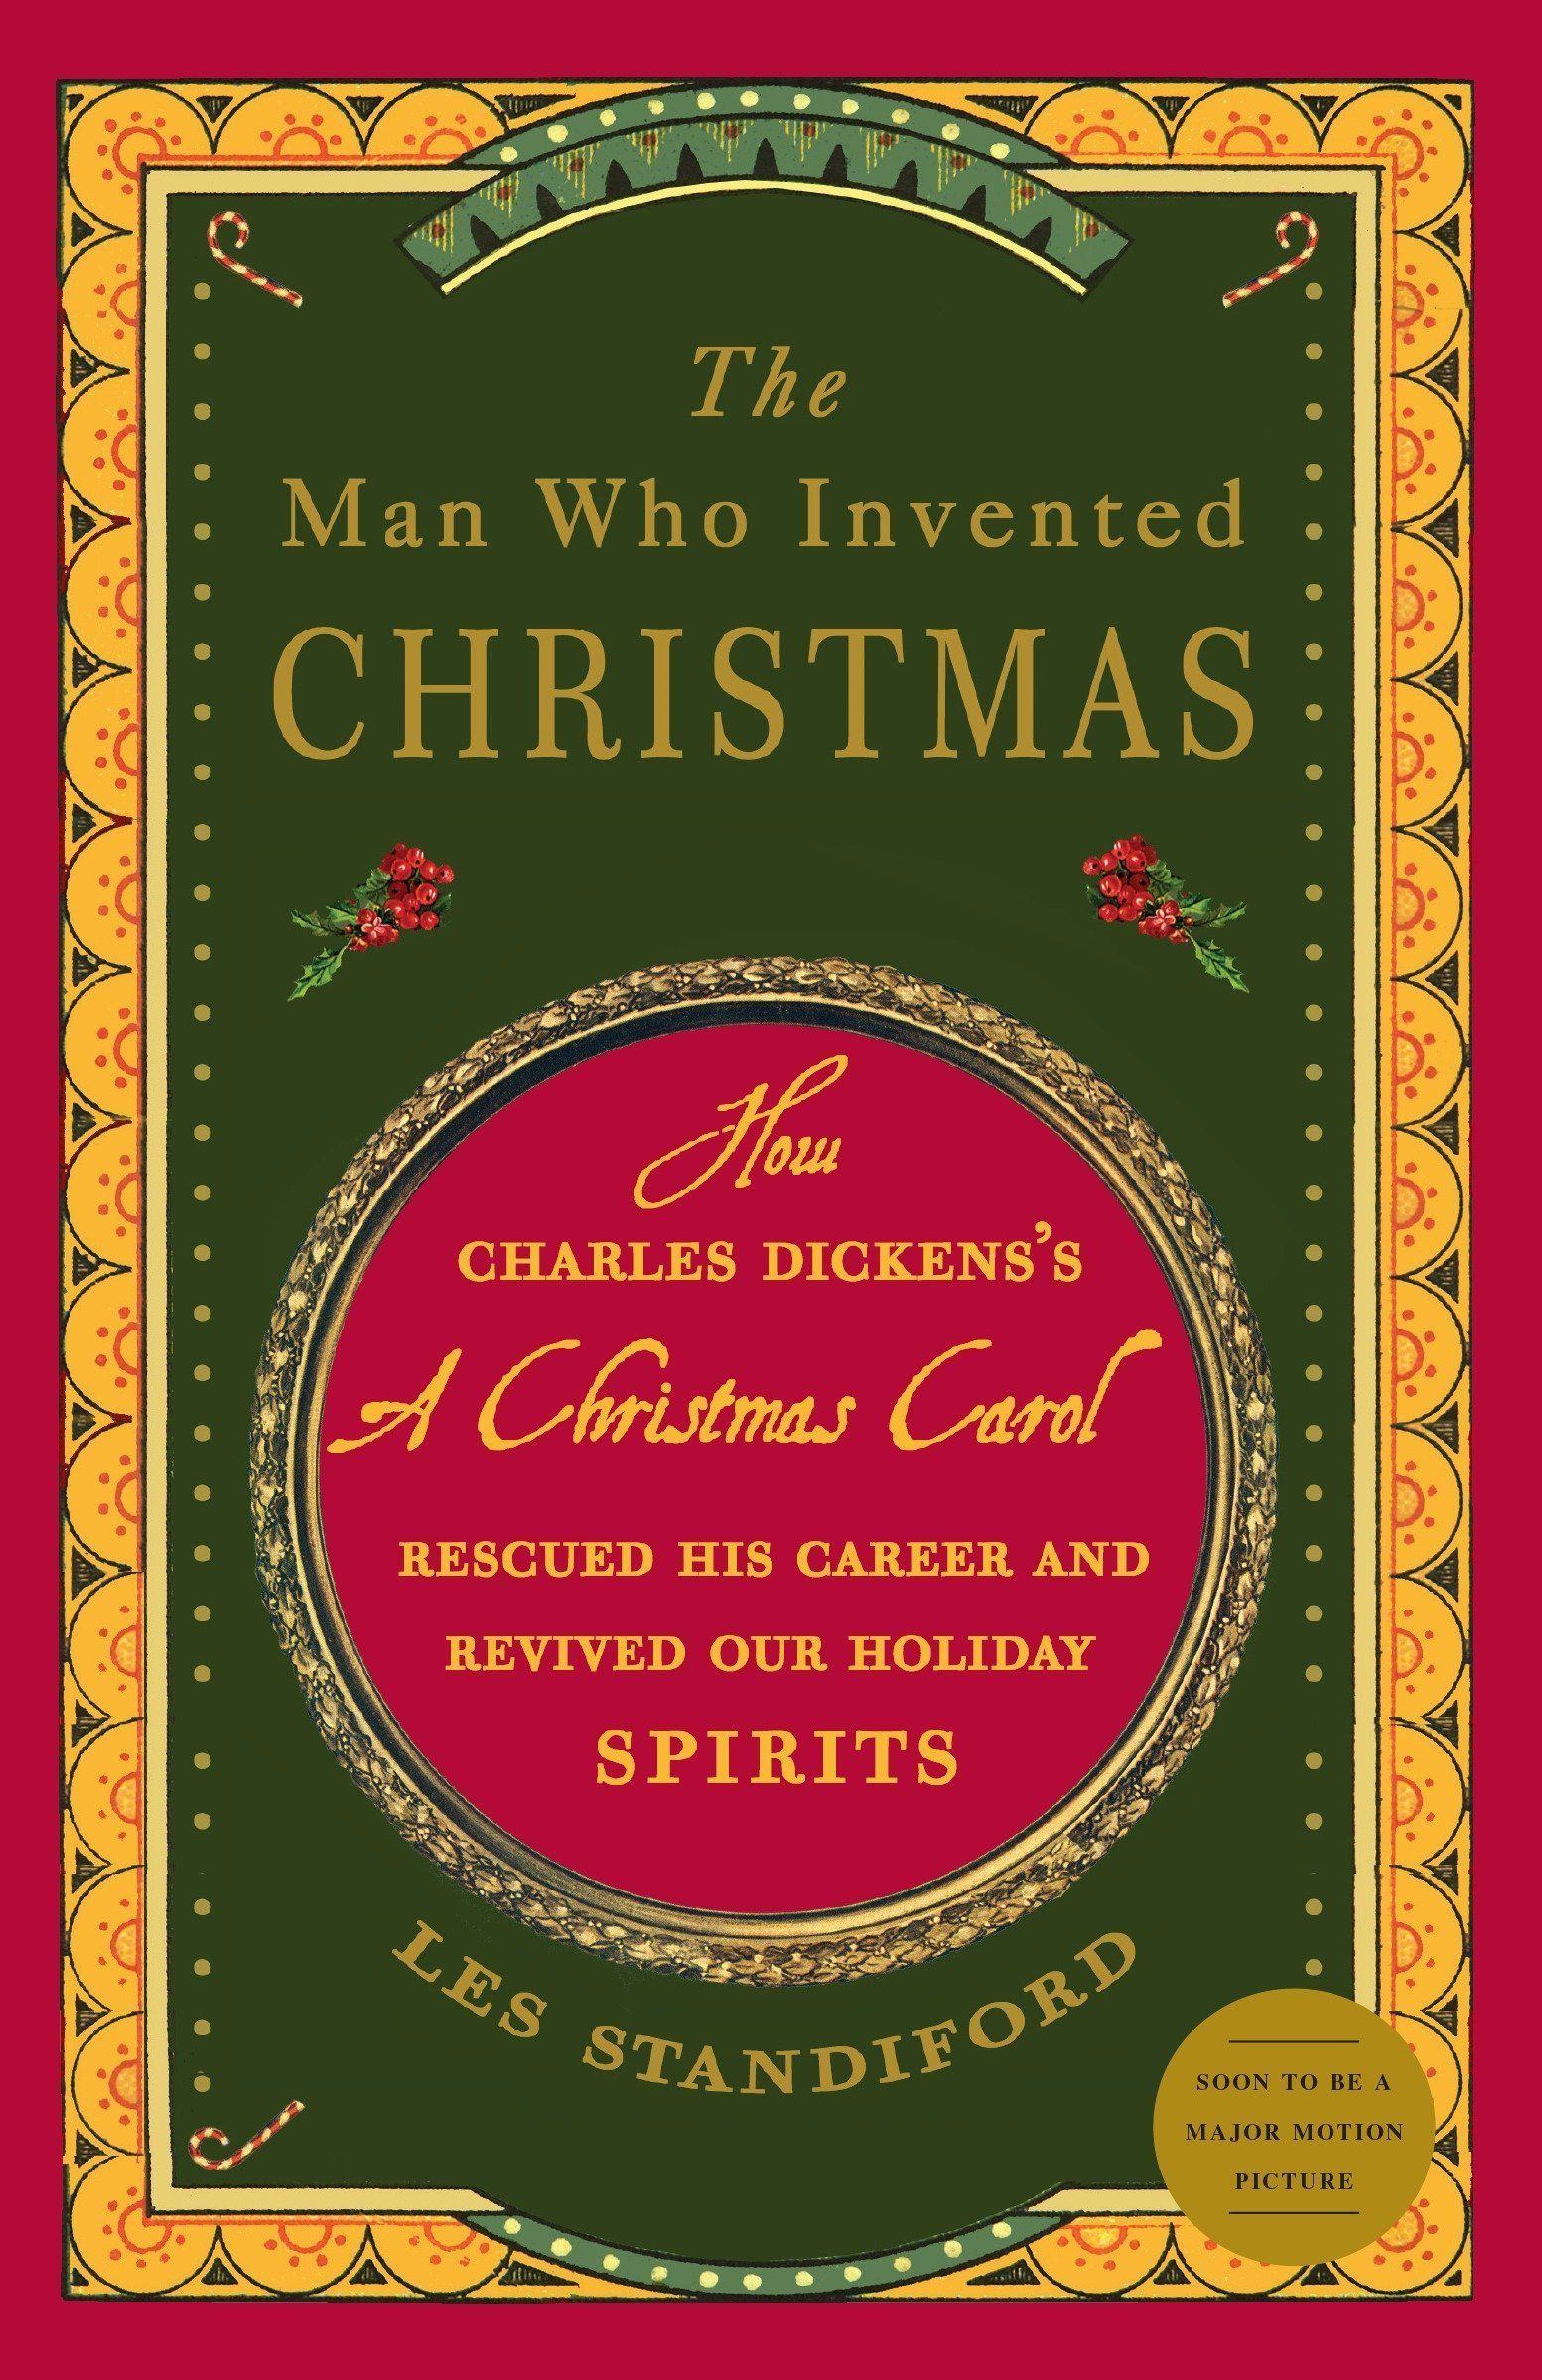 best of Dickens carol fun Charles facts christmas a